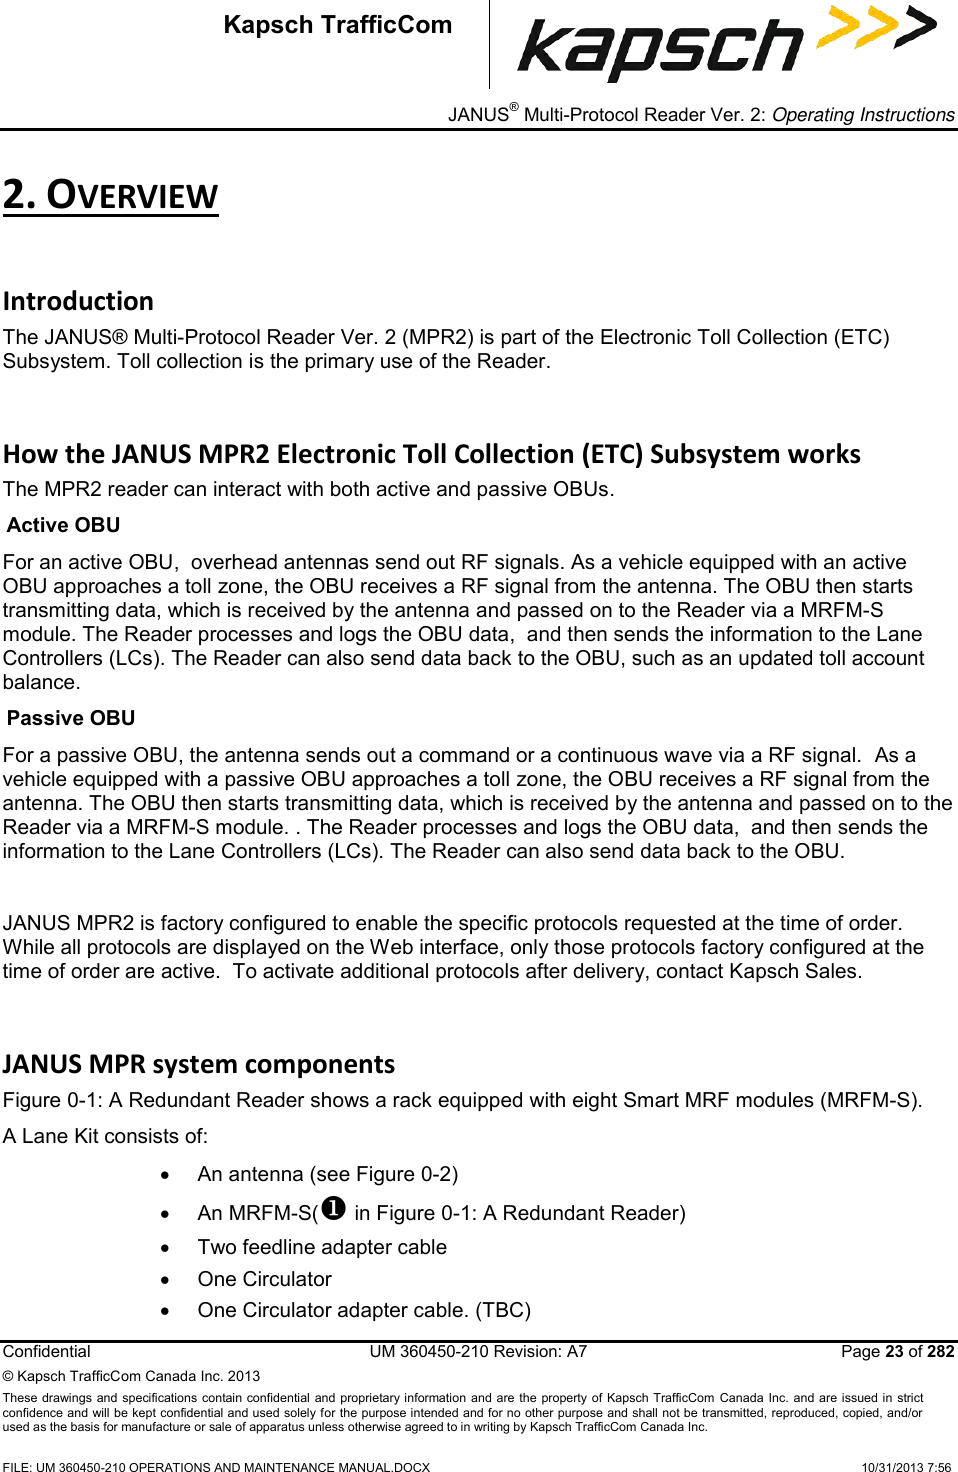 _ JANUS® Multi-Protocol Reader Ver. 2: Operating Instructions  Confidential  UM 360450-210 Revision: A7   Page 23 of 282 © Kapsch TrafficCom Canada Inc. 2013 These  drawings and specifications contain confidential  and  proprietary information and are  the  property of Kapsch TrafficCom  Canada Inc.  and are issued in strict confidence and will be kept confidential and used solely for the purpose intended and for no other purpose and shall not be transmitted, reproduced, copied, and/or used as the basis for manufacture or sale of apparatus unless otherwise agreed to in writing by Kapsch TrafficCom Canada Inc.  FILE: UM 360450-210 OPERATIONS AND MAINTENANCE MANUAL.DOCX    10/31/2013 7:56  Kapsch TrafficCom 2. OVERVIEW Introduction The JANUS® Multi-Protocol Reader Ver. 2 (MPR2) is part of the Electronic Toll Collection (ETC) Subsystem. Toll collection is the primary use of the Reader. How the JANUS MPR2 Electronic Toll Collection (ETC) Subsystem works The MPR2 reader can interact with both active and passive OBUs. Active OBU For an active OBU,  overhead antennas send out RF signals. As a vehicle equipped with an active OBU approaches a toll zone, the OBU receives a RF signal from the antenna. The OBU then starts transmitting data, which is received by the antenna and passed on to the Reader via a MRFM-S module. The Reader processes and logs the OBU data,  and then sends the information to the Lane Controllers (LCs). The Reader can also send data back to the OBU, such as an updated toll account balance. Passive OBU For a passive OBU, the antenna sends out a command or a continuous wave via a RF signal.  As a vehicle equipped with a passive OBU approaches a toll zone, the OBU receives a RF signal from the antenna. The OBU then starts transmitting data, which is received by the antenna and passed on to the Reader via a MRFM-S module. . The Reader processes and logs the OBU data,  and then sends the information to the Lane Controllers (LCs). The Reader can also send data back to the OBU.   JANUS MPR2 is factory configured to enable the specific protocols requested at the time of order.  While all protocols are displayed on the Web interface, only those protocols factory configured at the time of order are active.  To activate additional protocols after delivery, contact Kapsch Sales.  JANUS MPR system components Figure 0-1: A Redundant Reader shows a rack equipped with eight Smart MRF modules (MRFM-S). A Lane Kit consists of:    An antenna (see Figure 0-2)   An MRFM-S( in Figure 0-1: A Redundant Reader)   Two feedline adapter cable   One Circulator   One Circulator adapter cable. (TBC) 